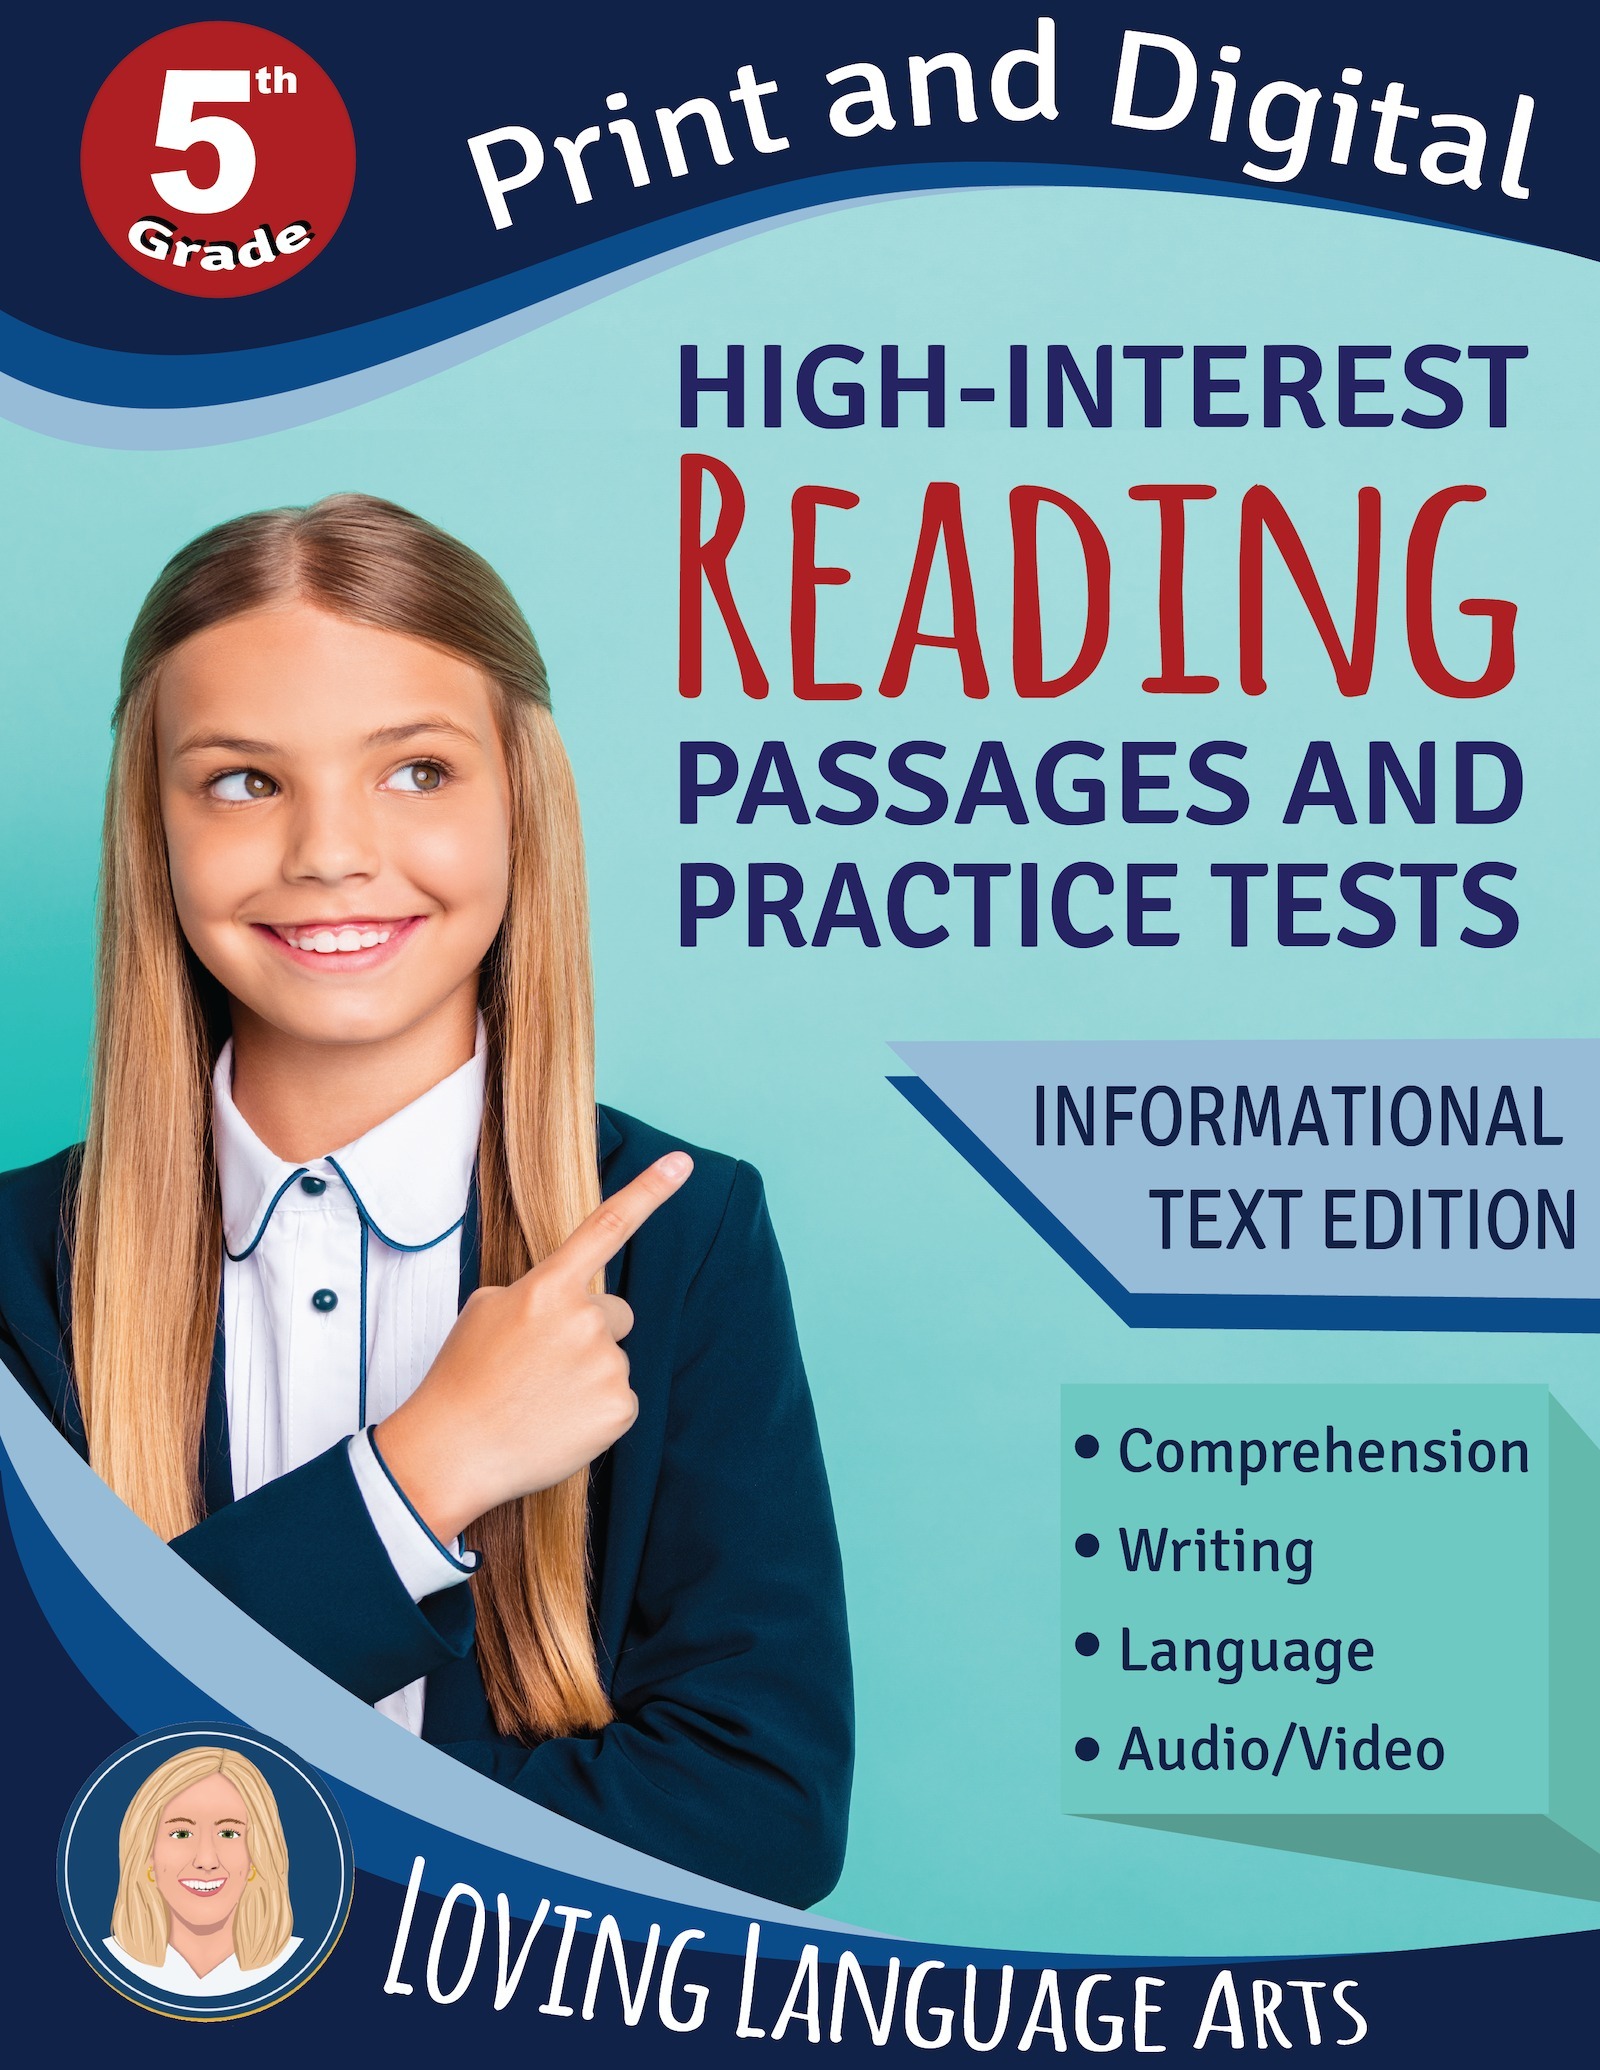 5th grade language arts workbook - High-interest passages and practice tests.